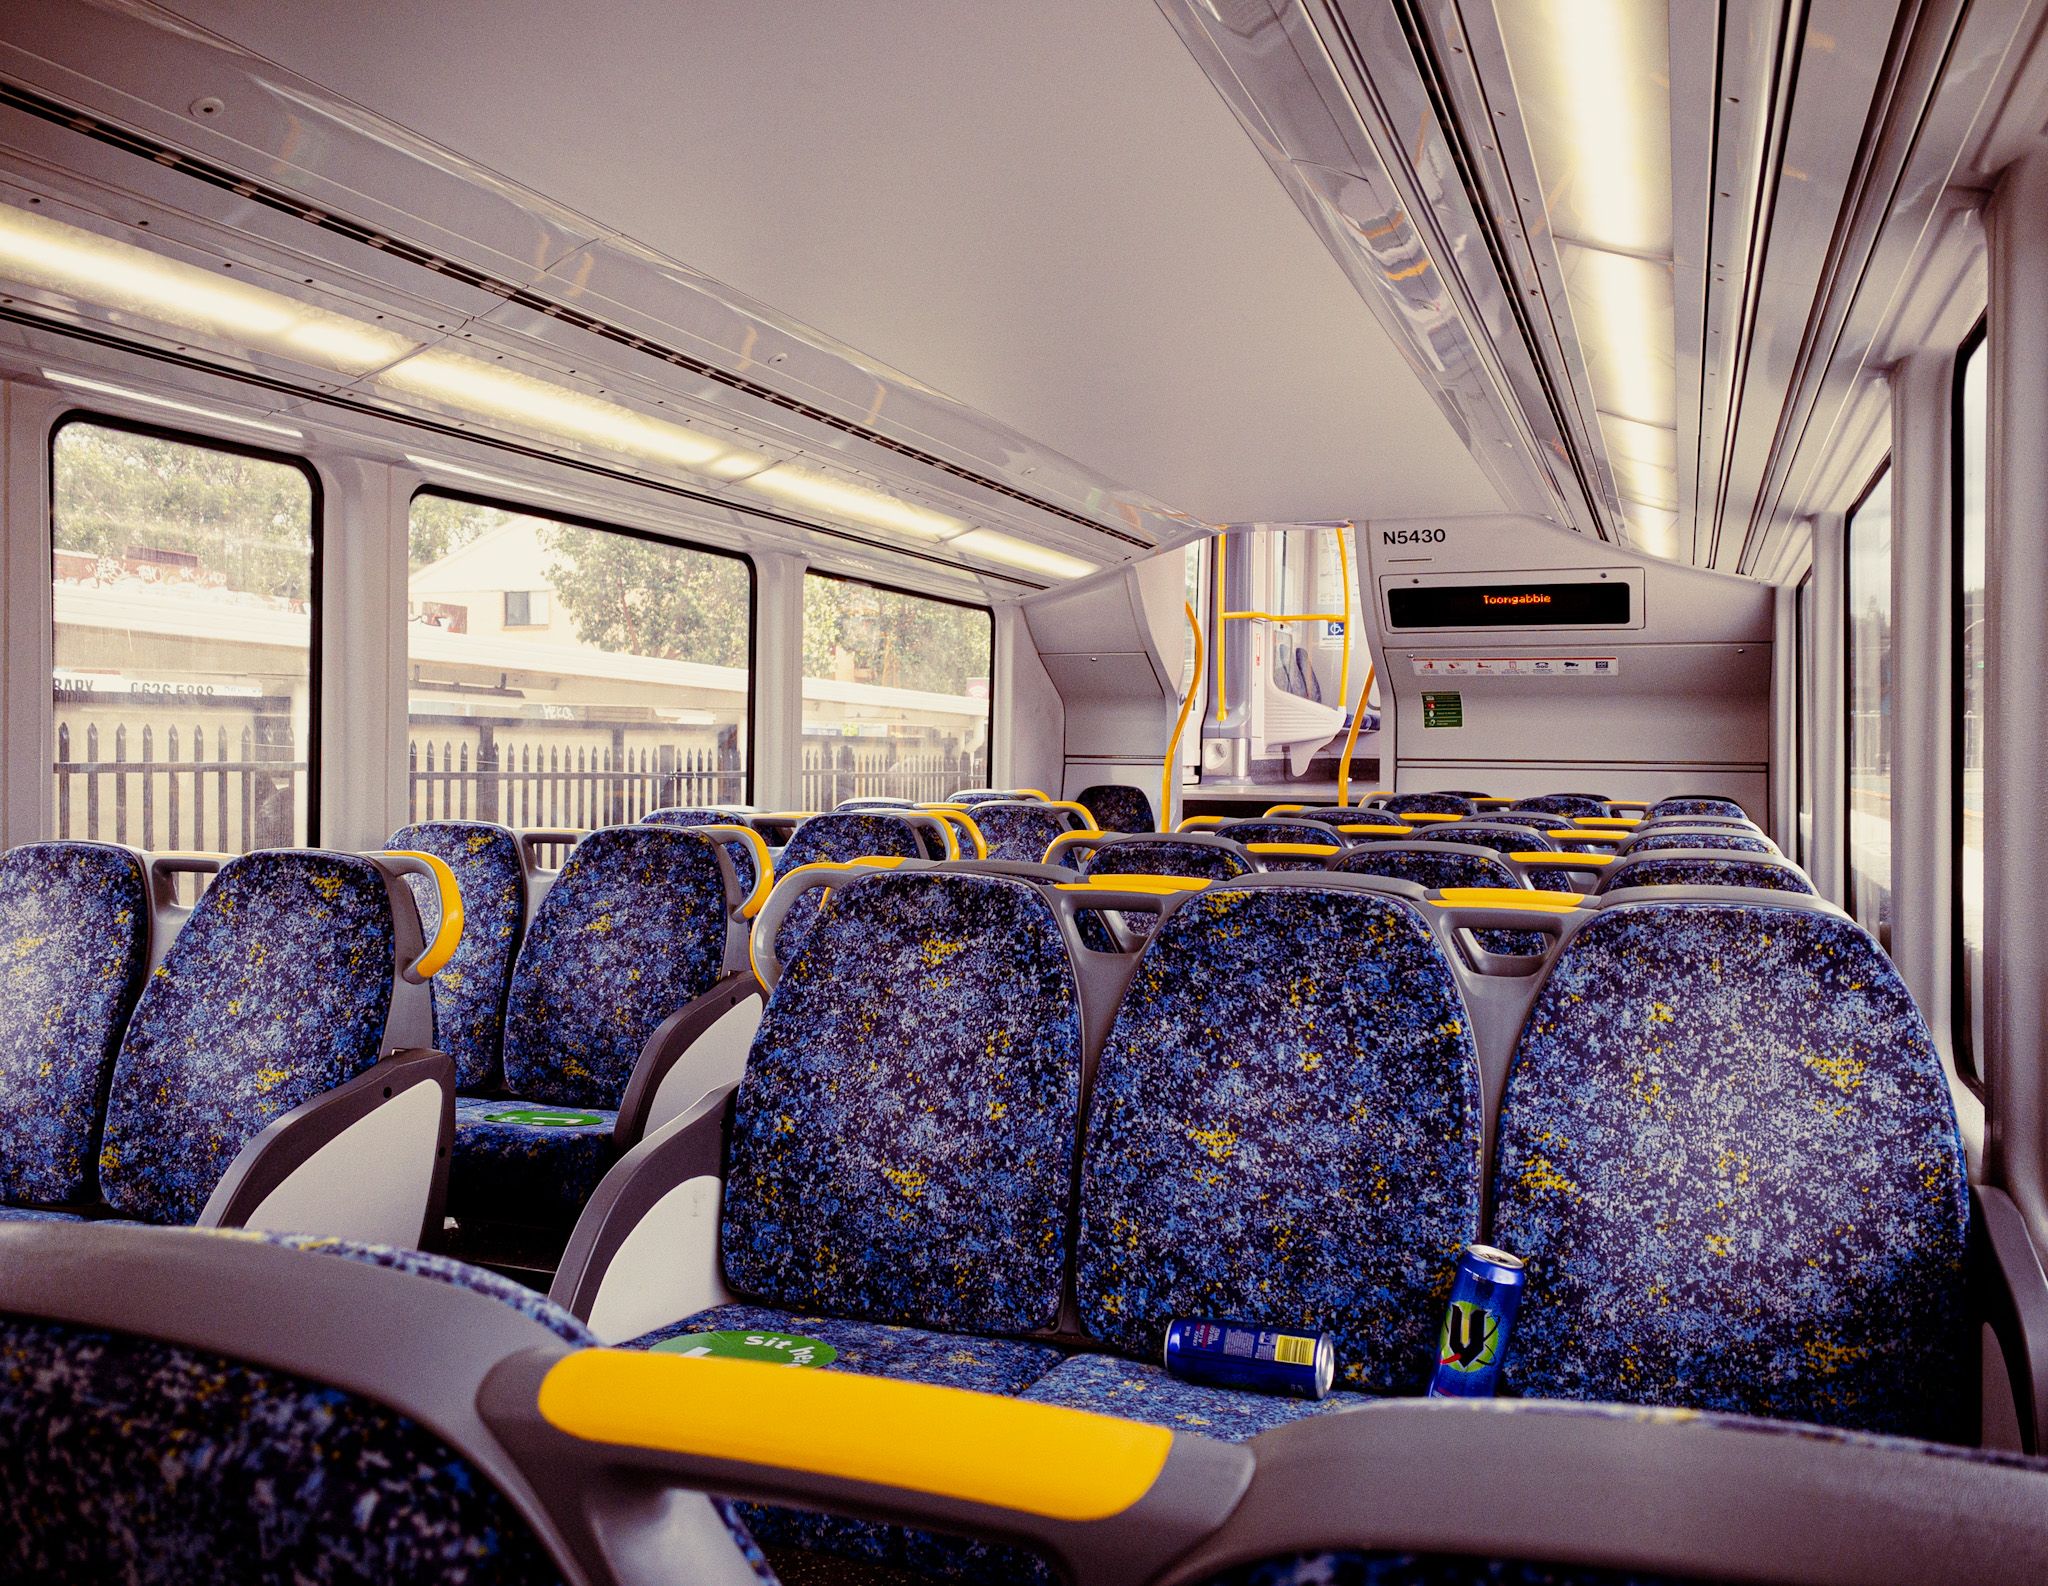 A photo of the inside of a Sydney Trains carriage with absolutely nobody in it.